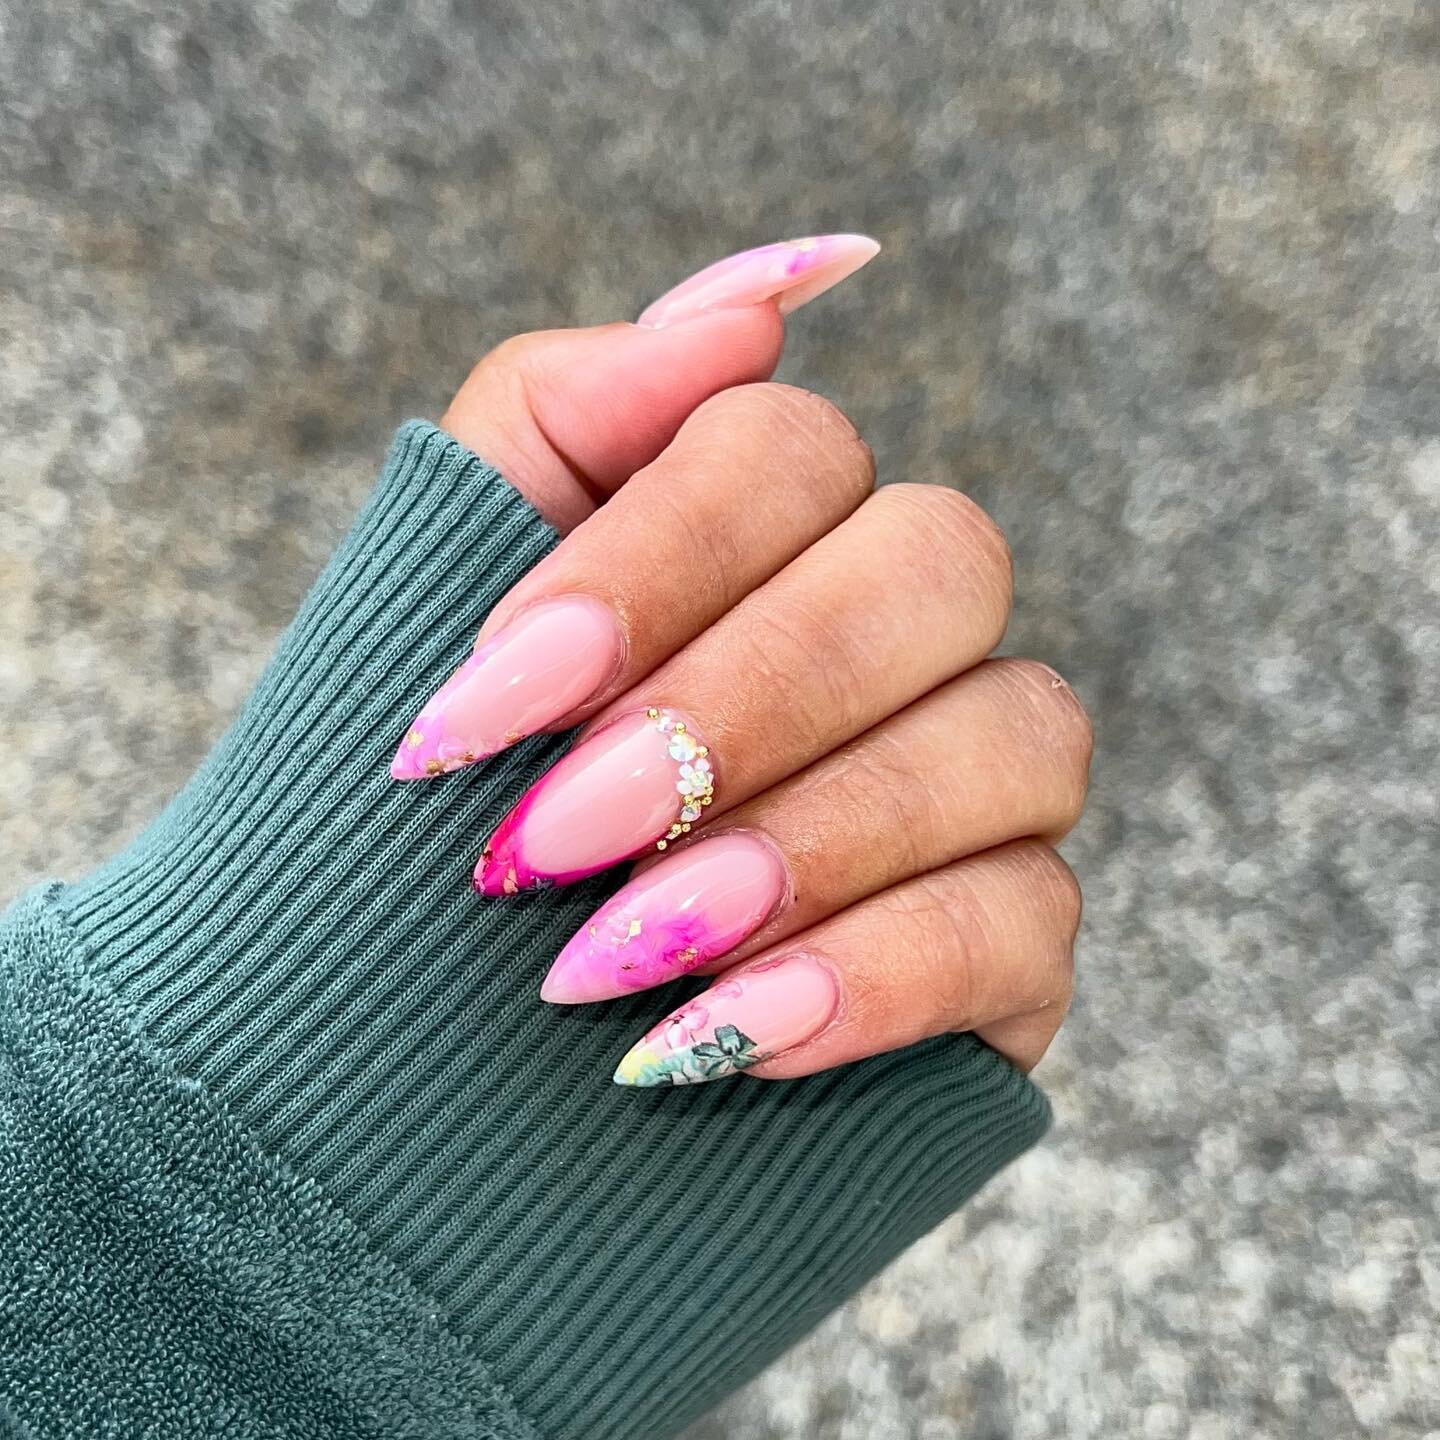 Nails by @ashleymarie.artistry @ashleymarie.nails 🤩
&bull;
Book your set today! 🥰
&bull;
#nail #ctnailtech #ctnails #ctnailsalon #ctnailartist #ctnailtechnician #ctnailstech #ctnailsalons #connecticutnails #connecticutnailartist #connecticutnailart